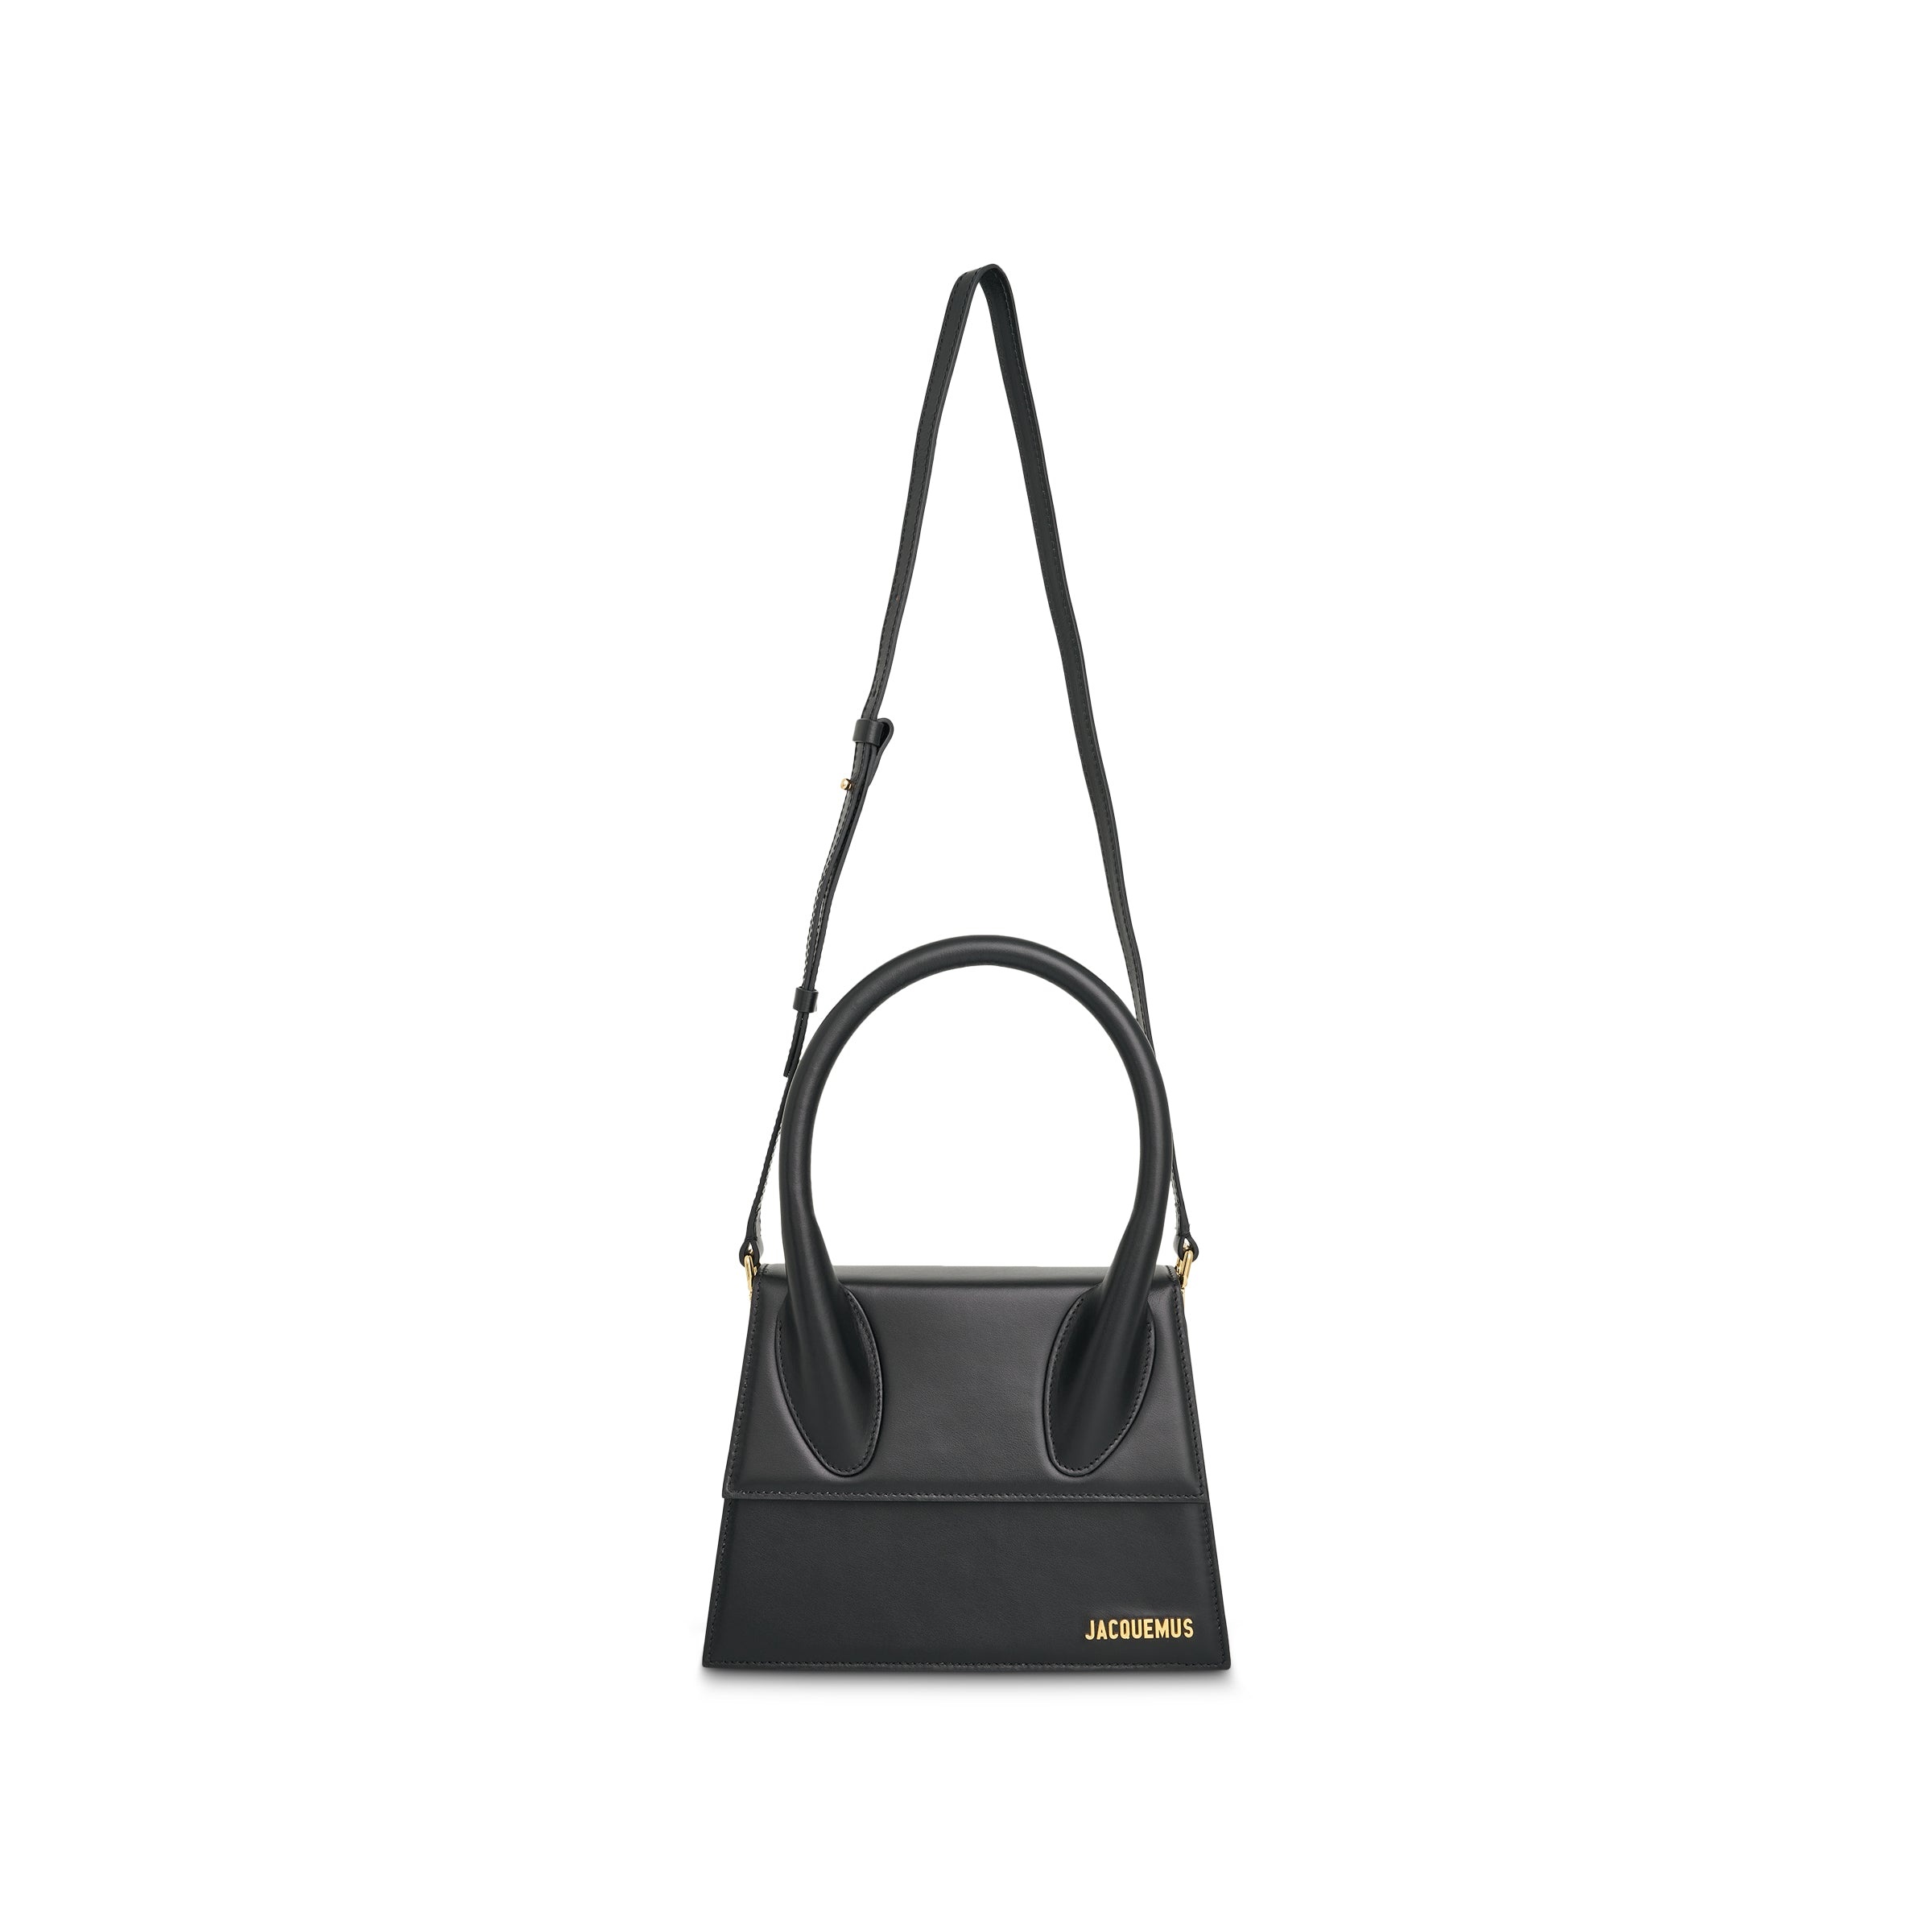 Le Grand Chiquito Leather Bag in Black - 1